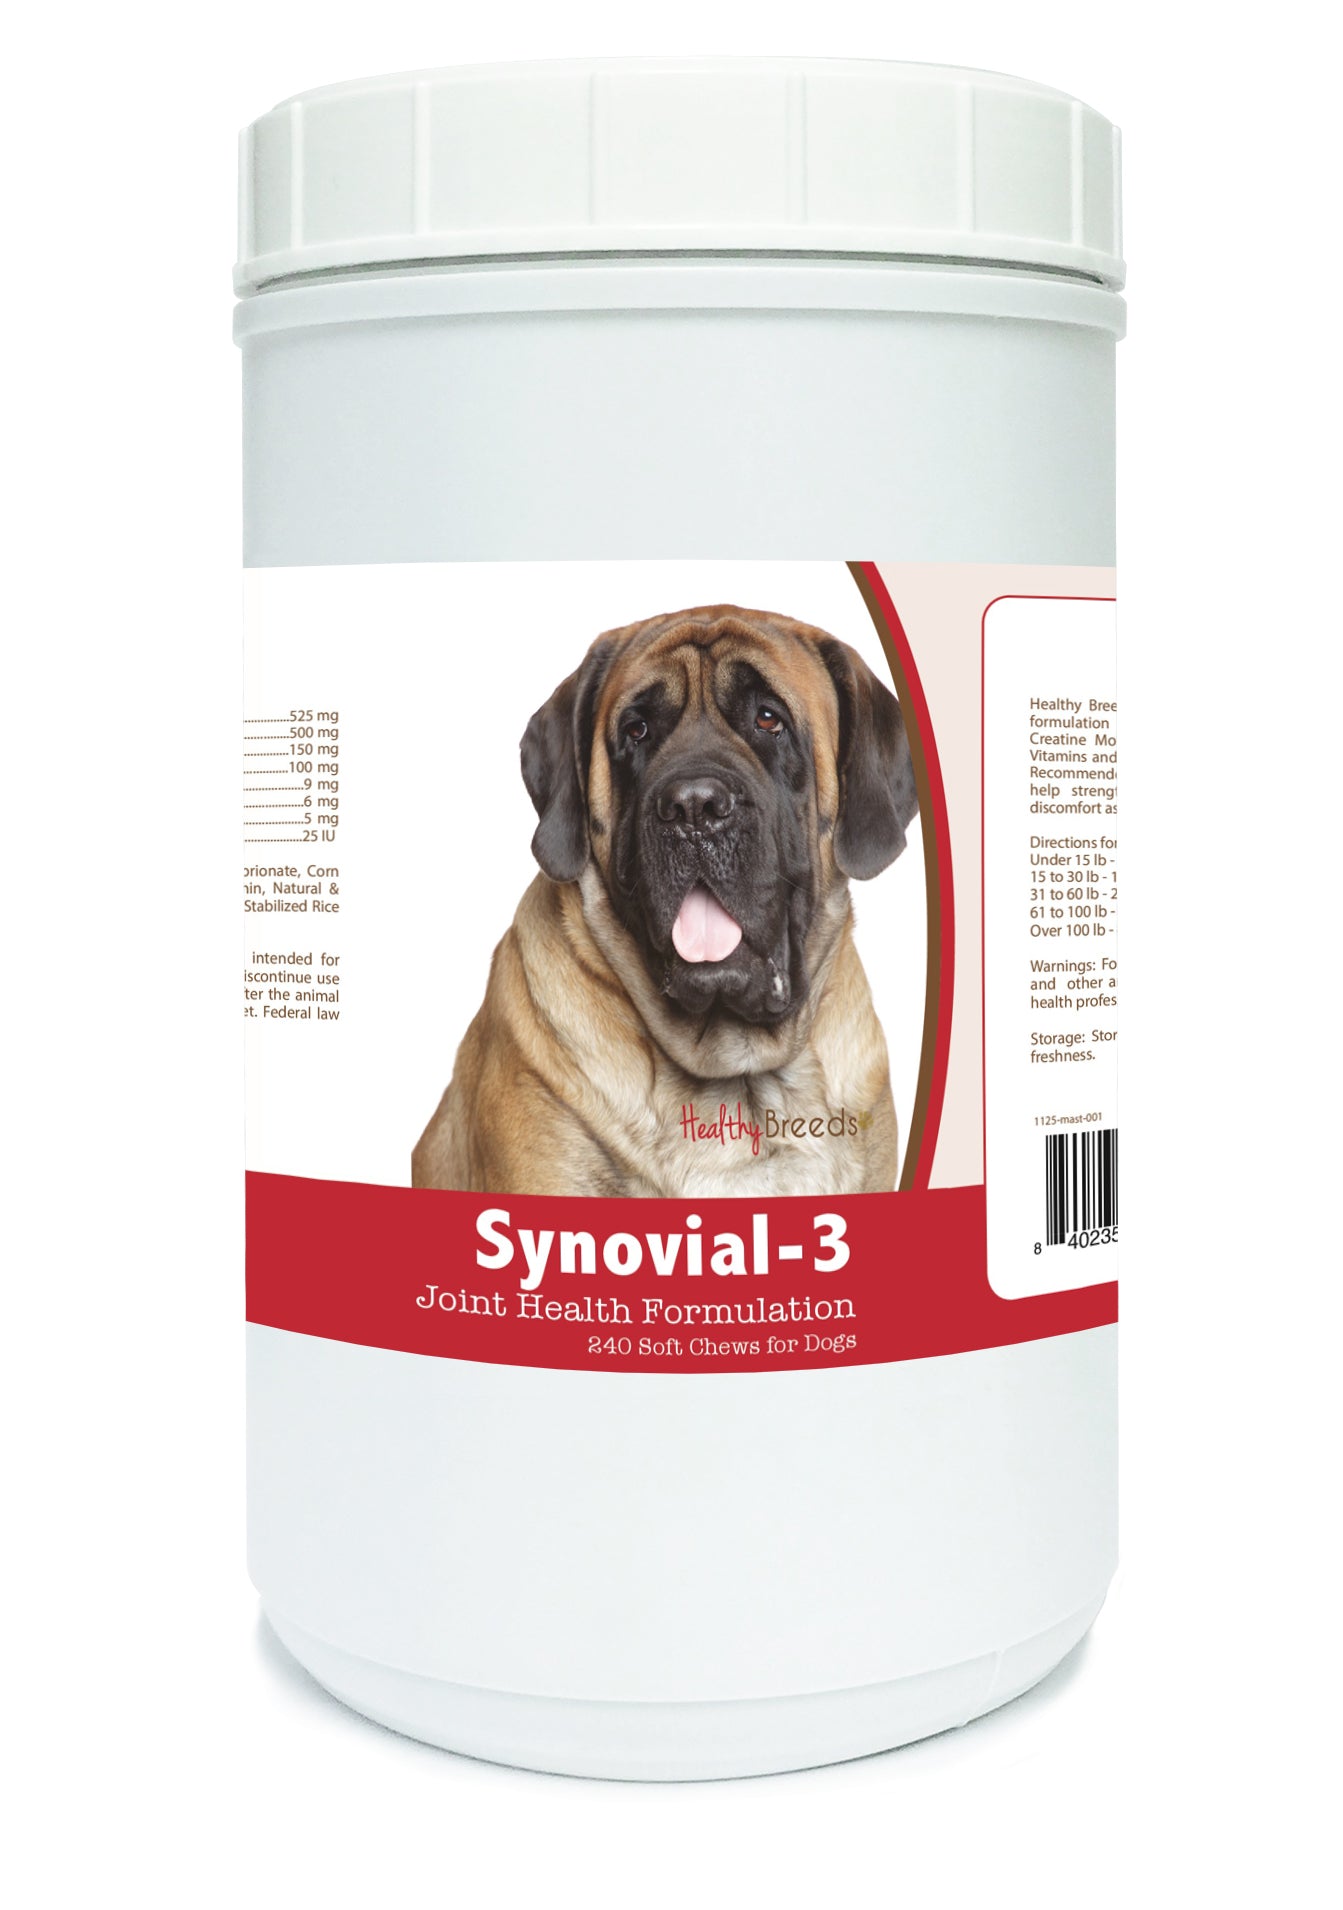 Mastiff Synovial-3 Joint Health Formulation Soft Chews 240 Count